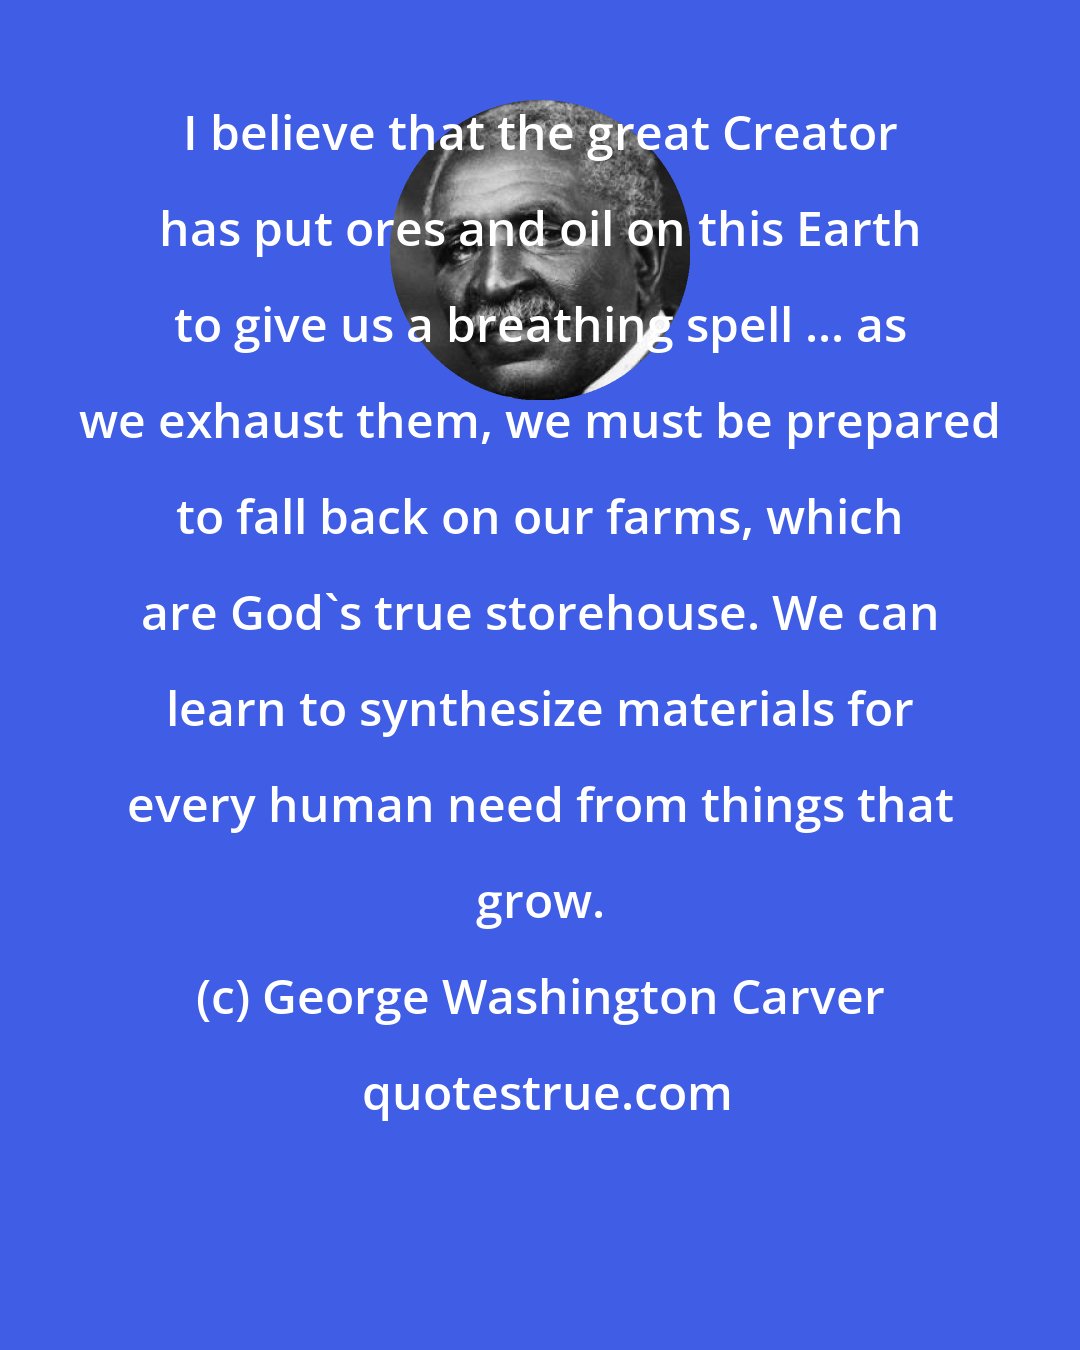 George Washington Carver: I believe that the great Creator has put ores and oil on this Earth to give us a breathing spell ... as we exhaust them, we must be prepared to fall back on our farms, which are God's true storehouse. We can learn to synthesize materials for every human need from things that grow.